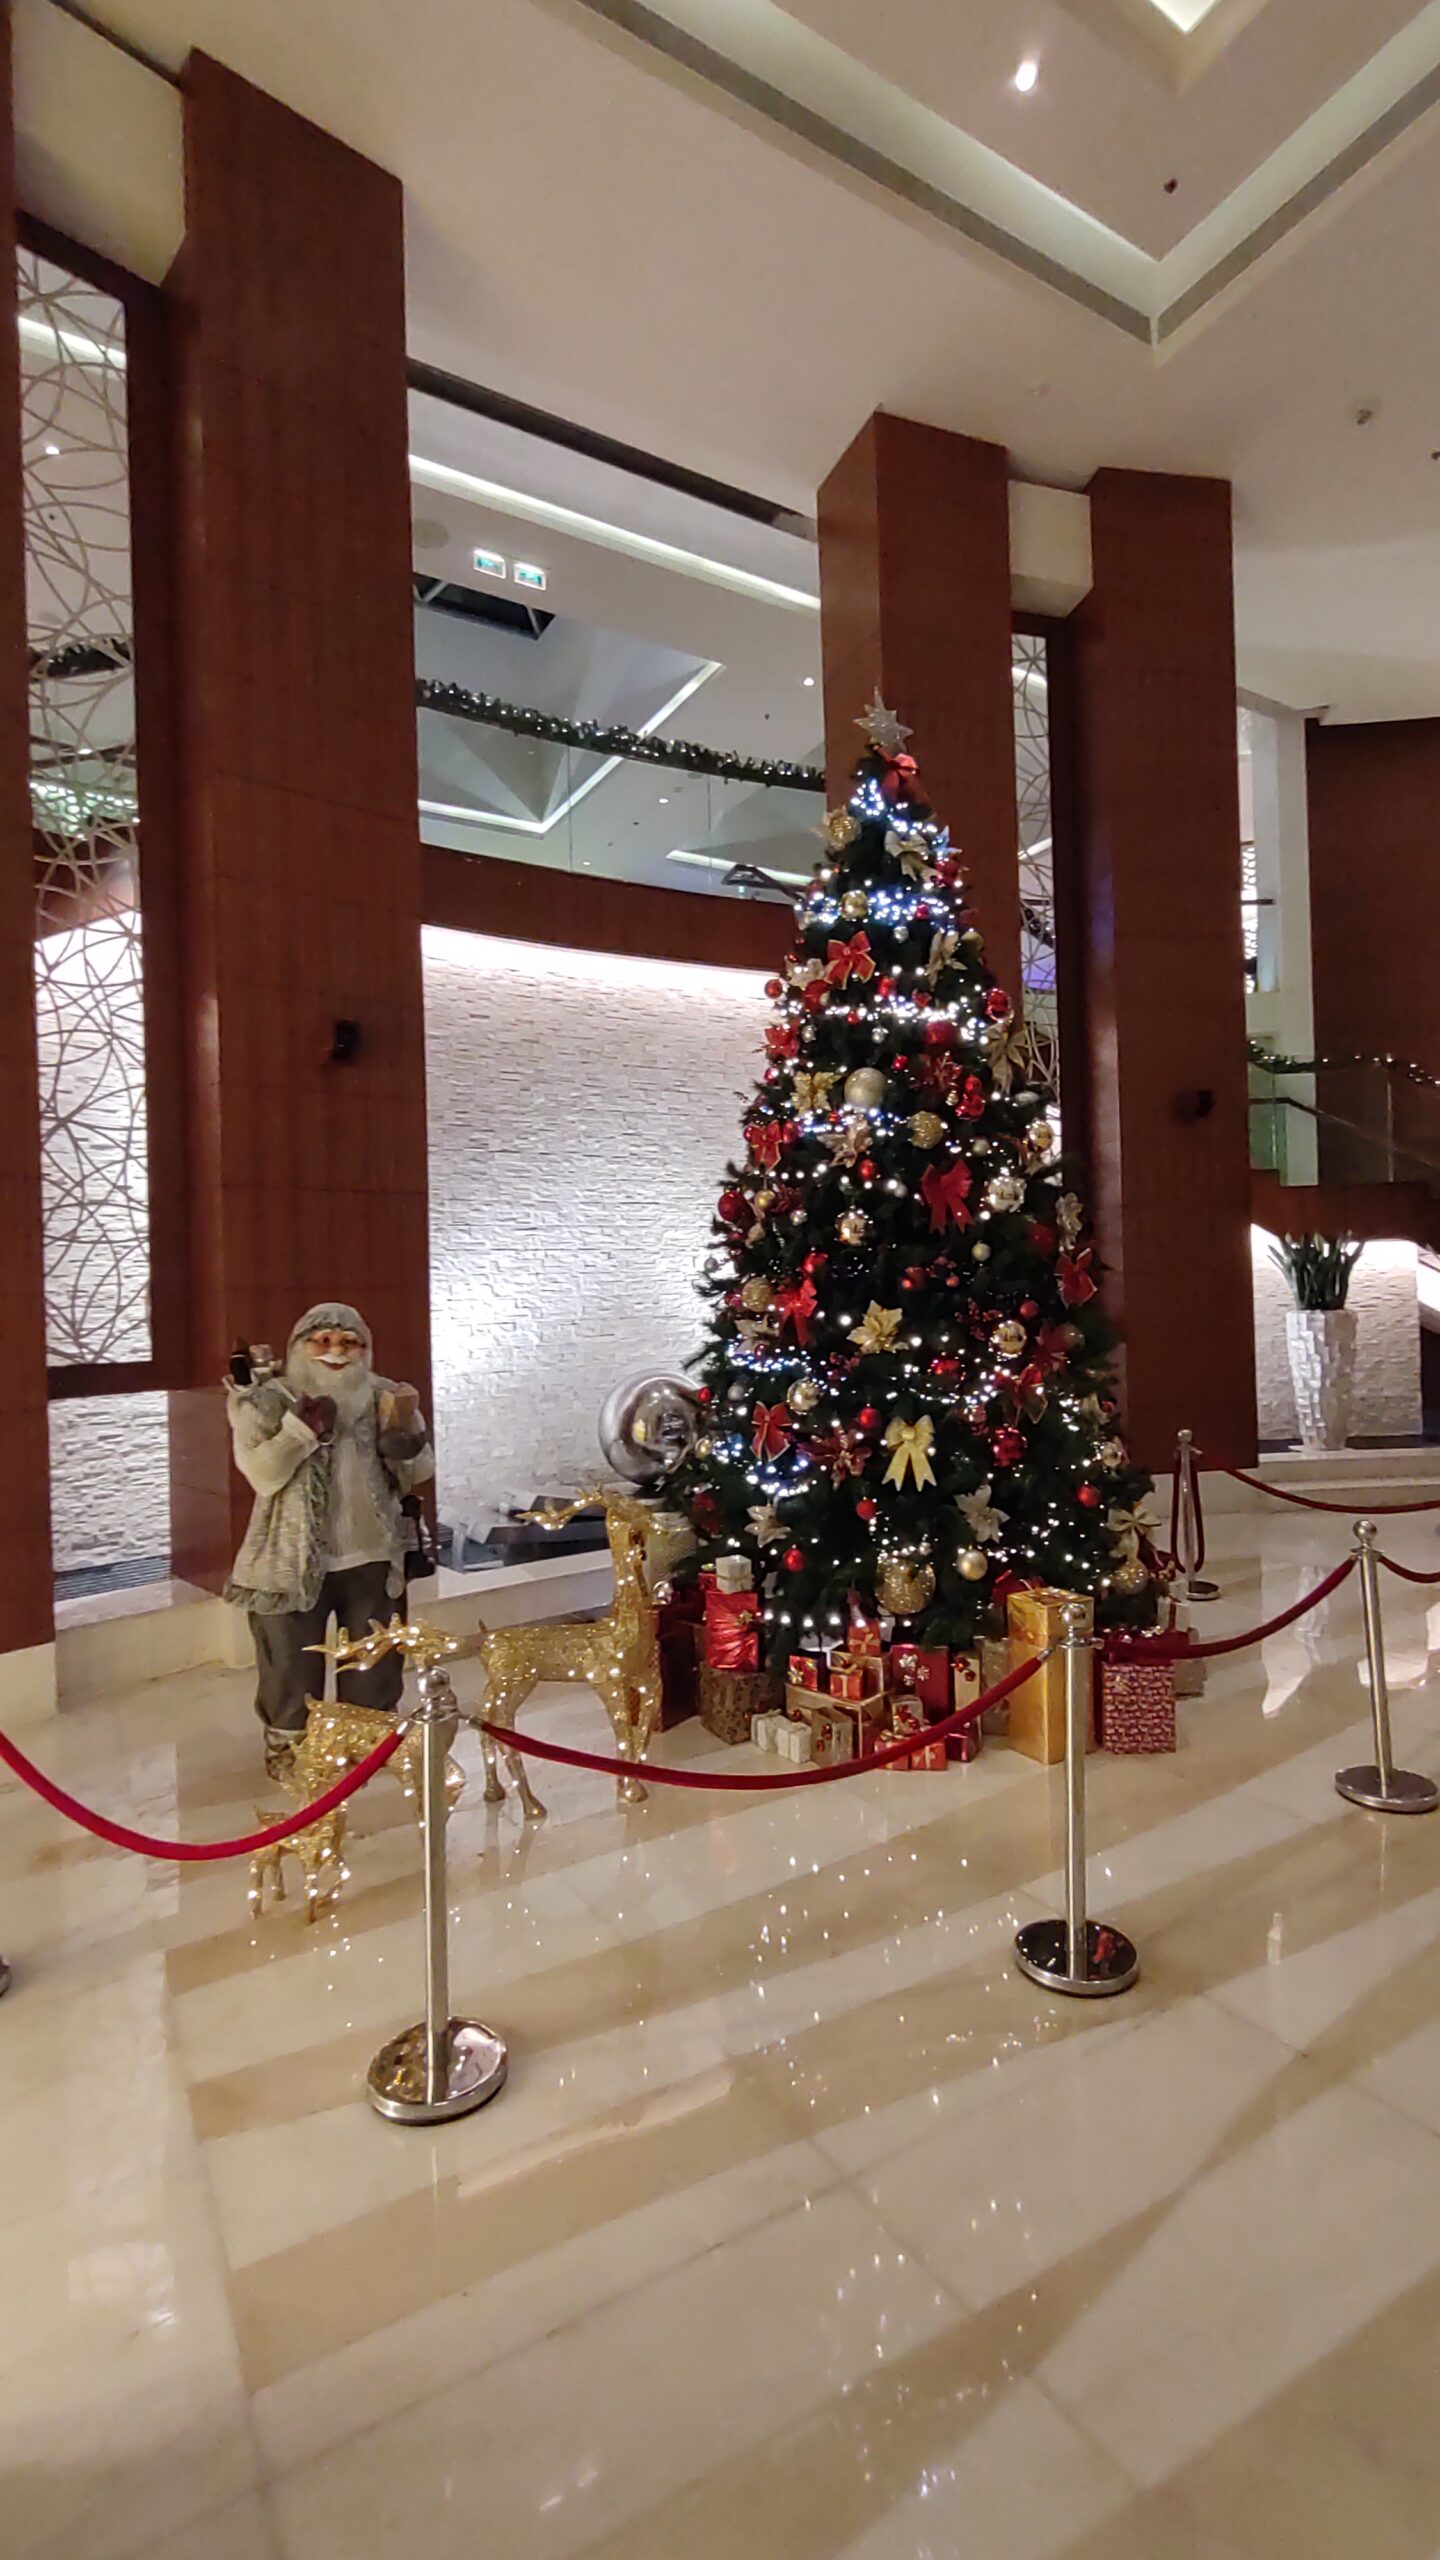 PICTURE OF THE CHRISTMAS TREE IN THE LOBBY.